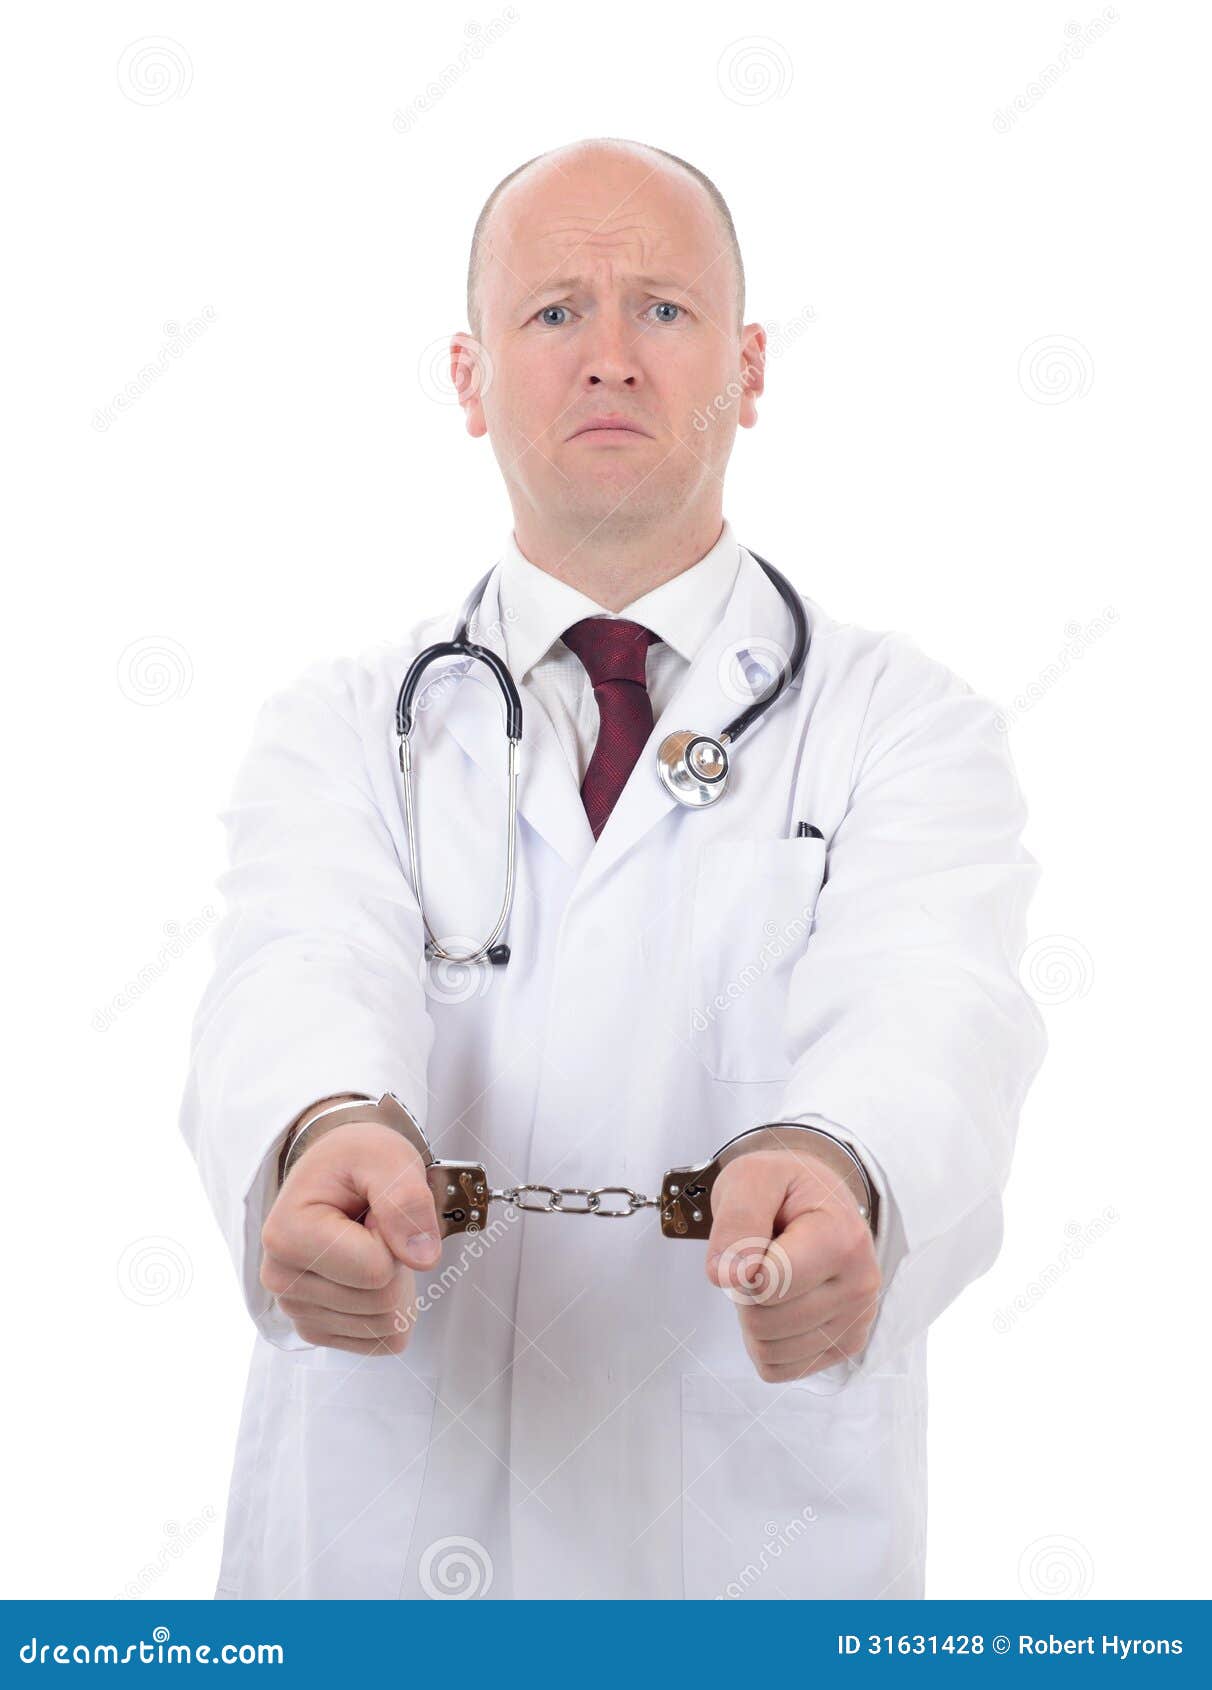 malpractice by a doctor